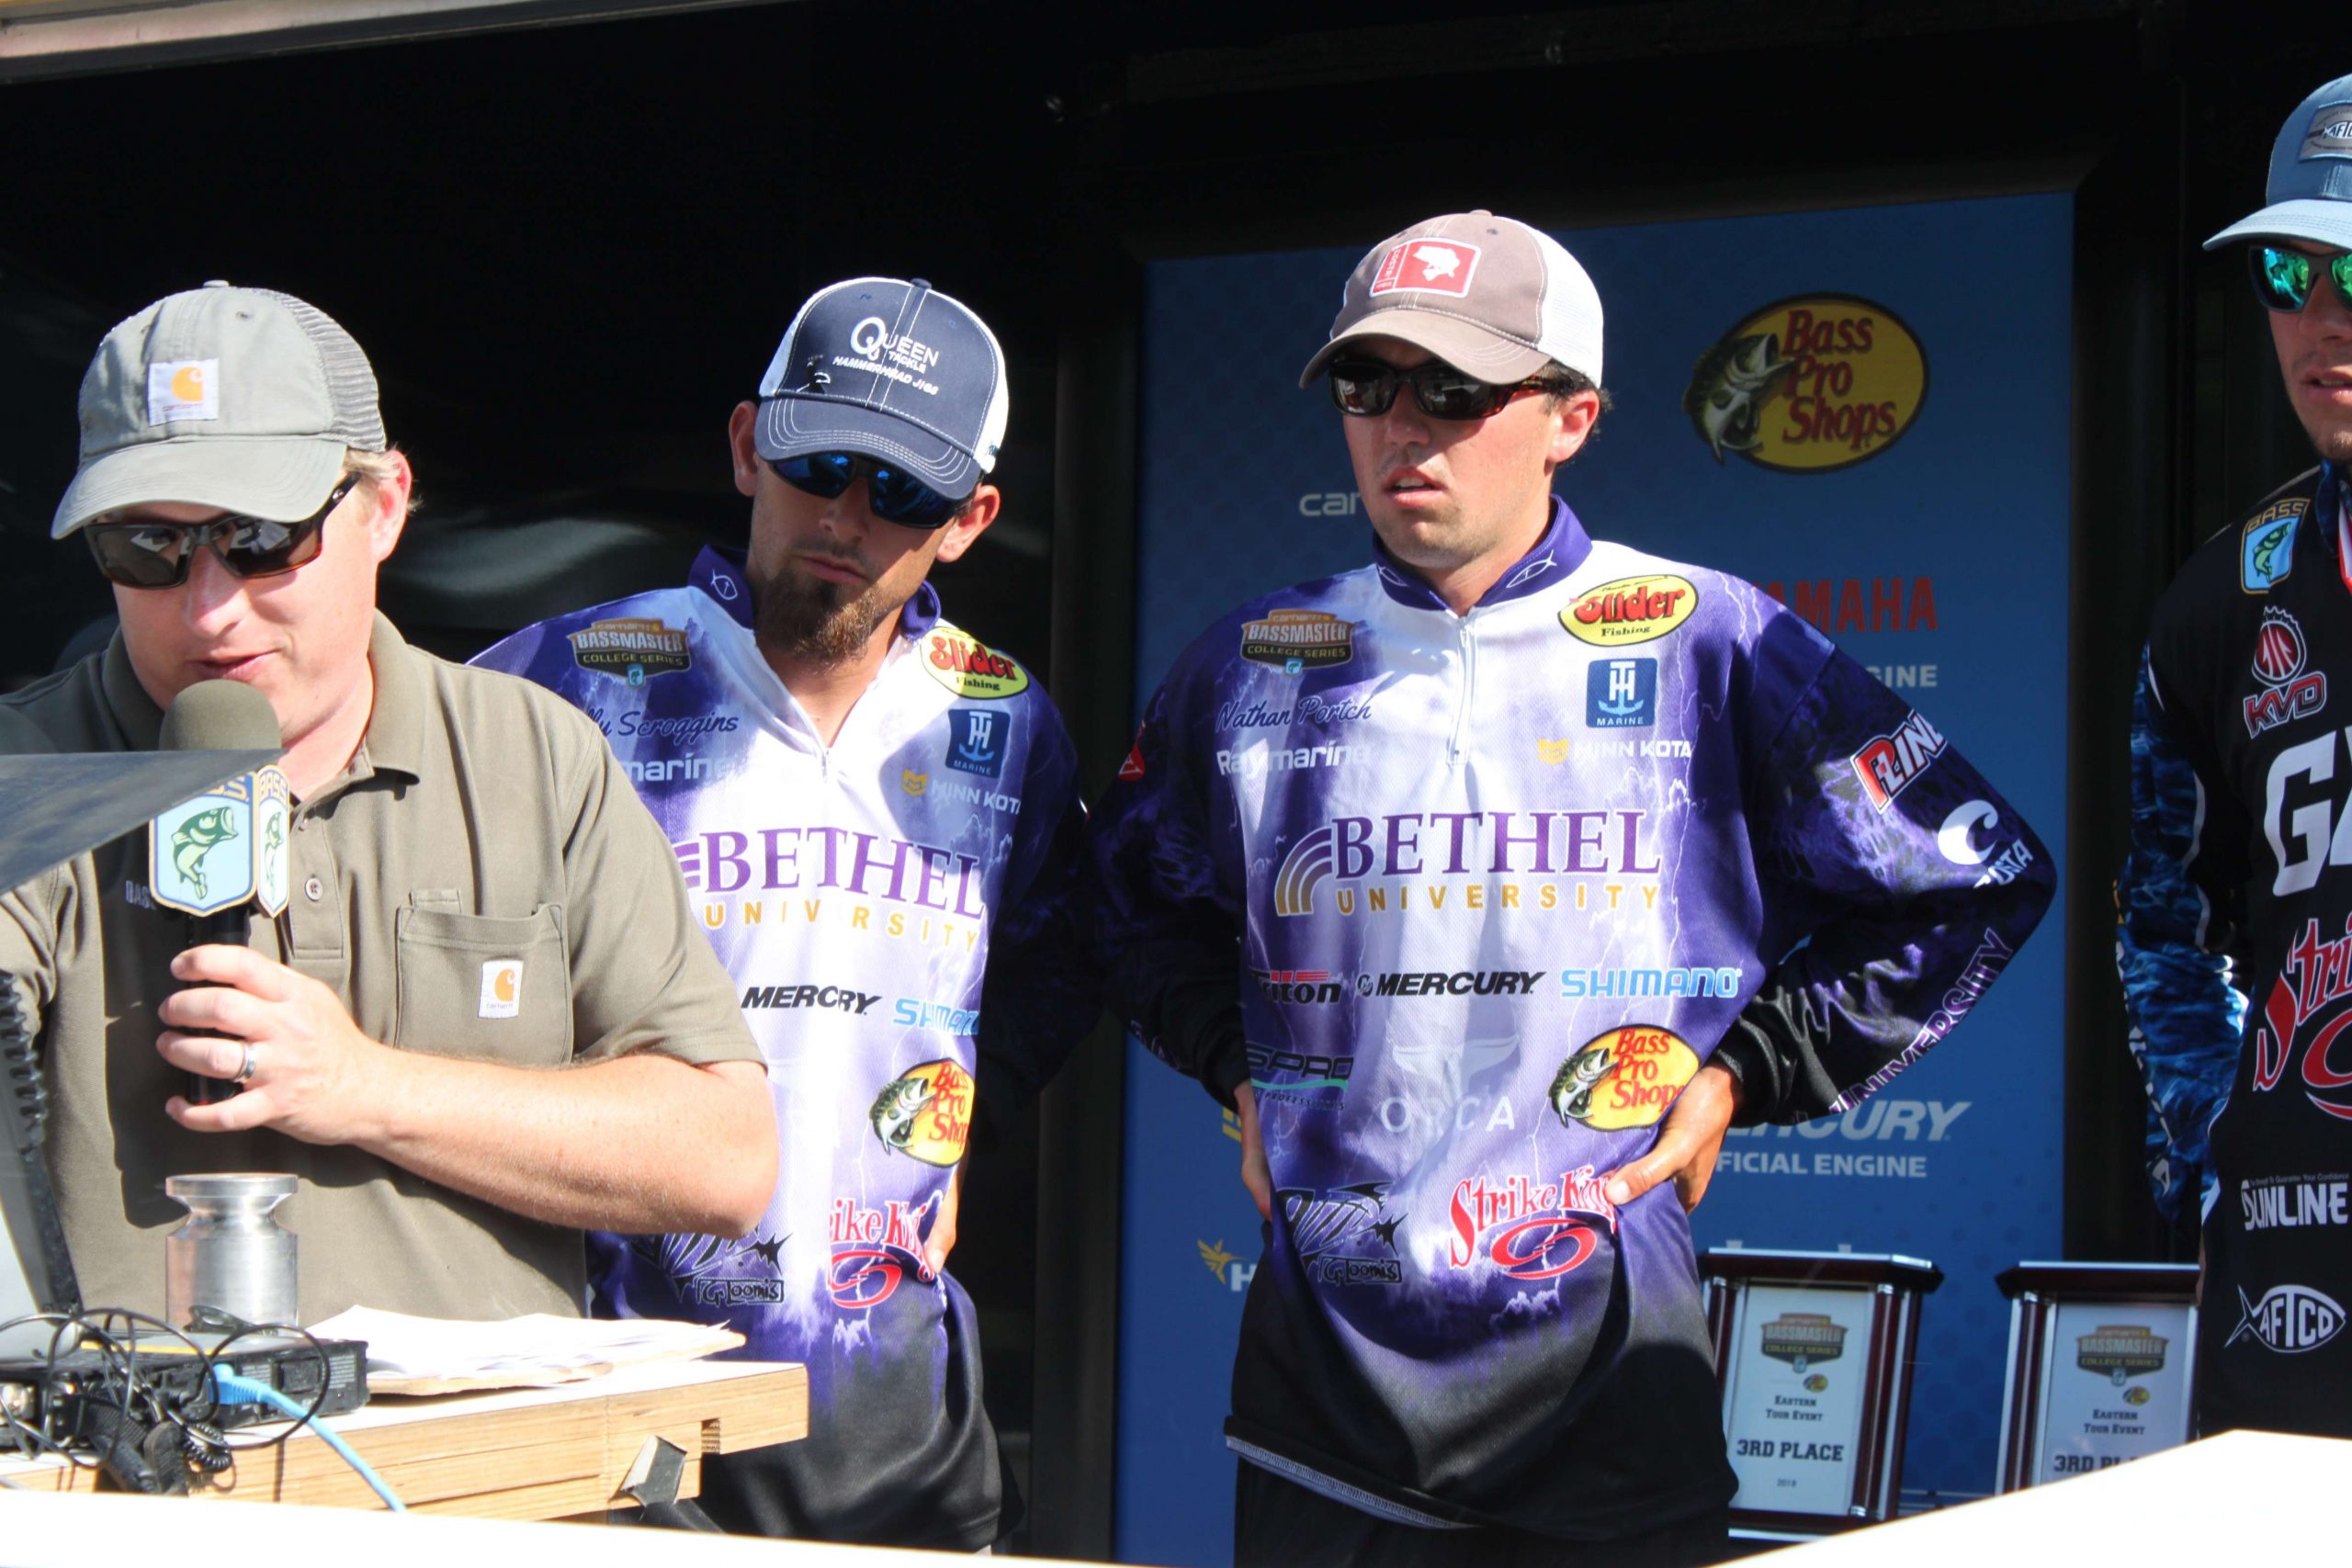 But did they have enough? The final four anglers crowd around the scales for a better look.